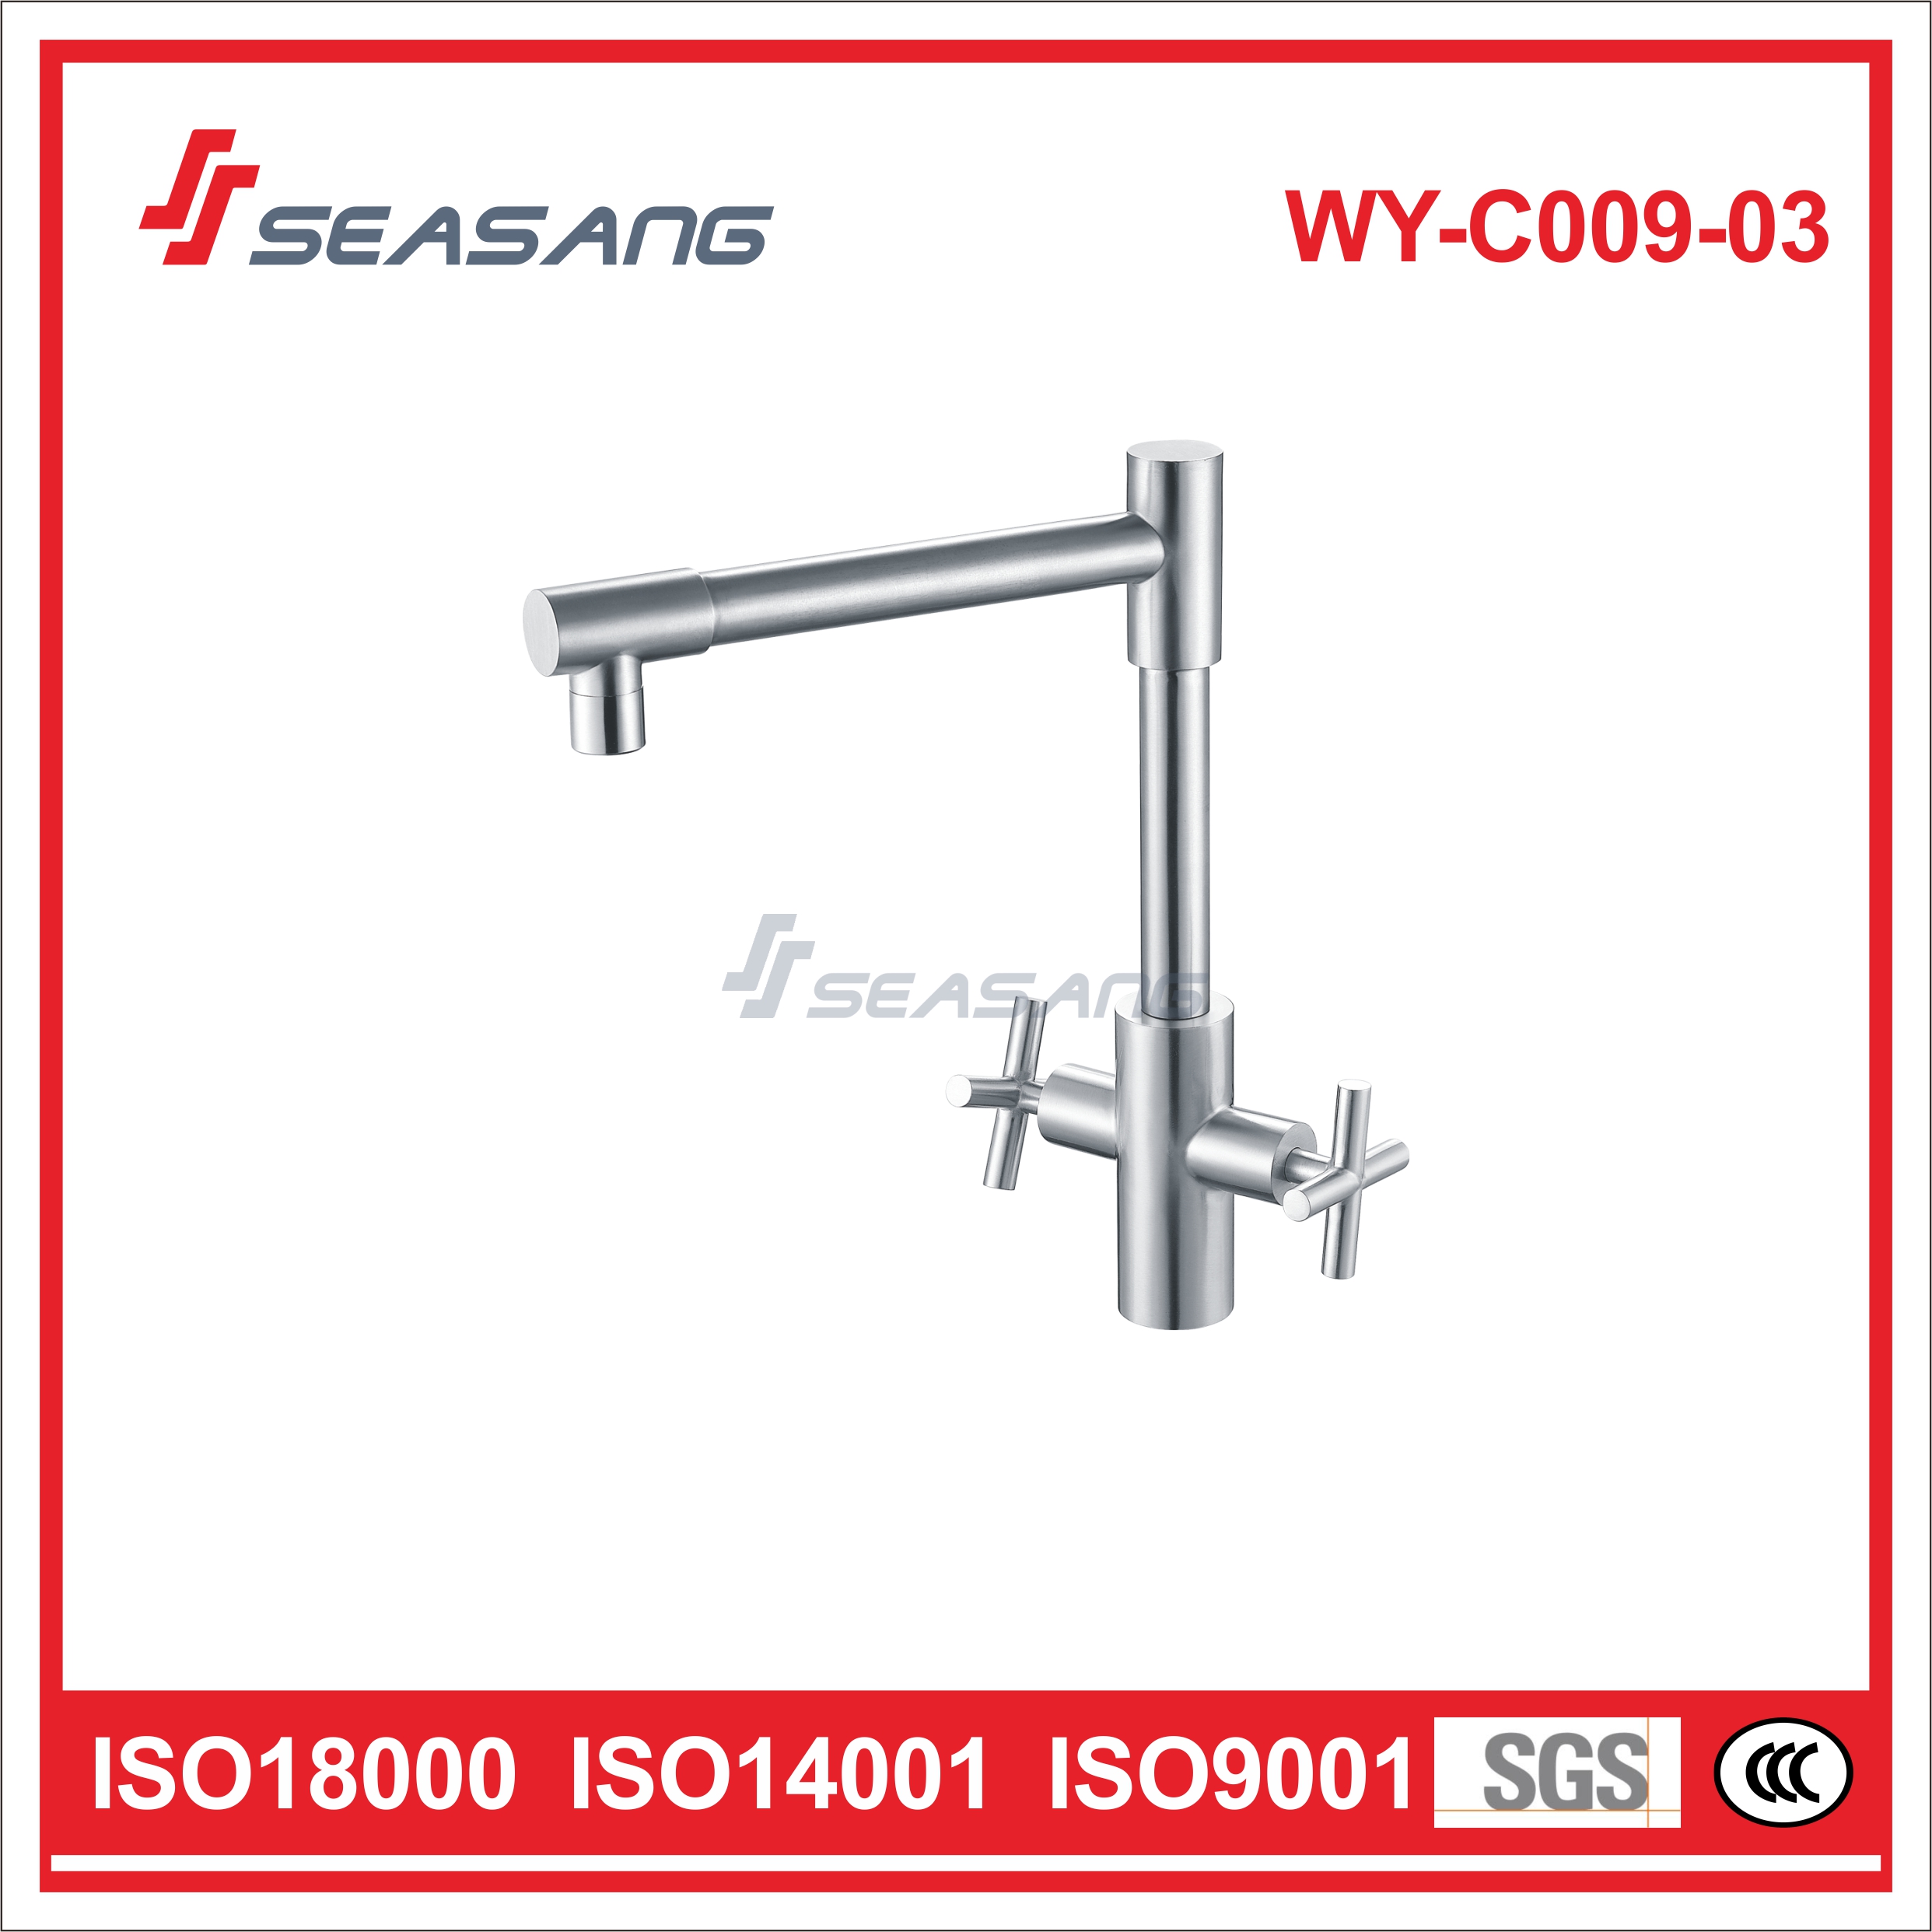 Stainless Steel Double Handle Faucet for Kitchen Sink WY-C009-03